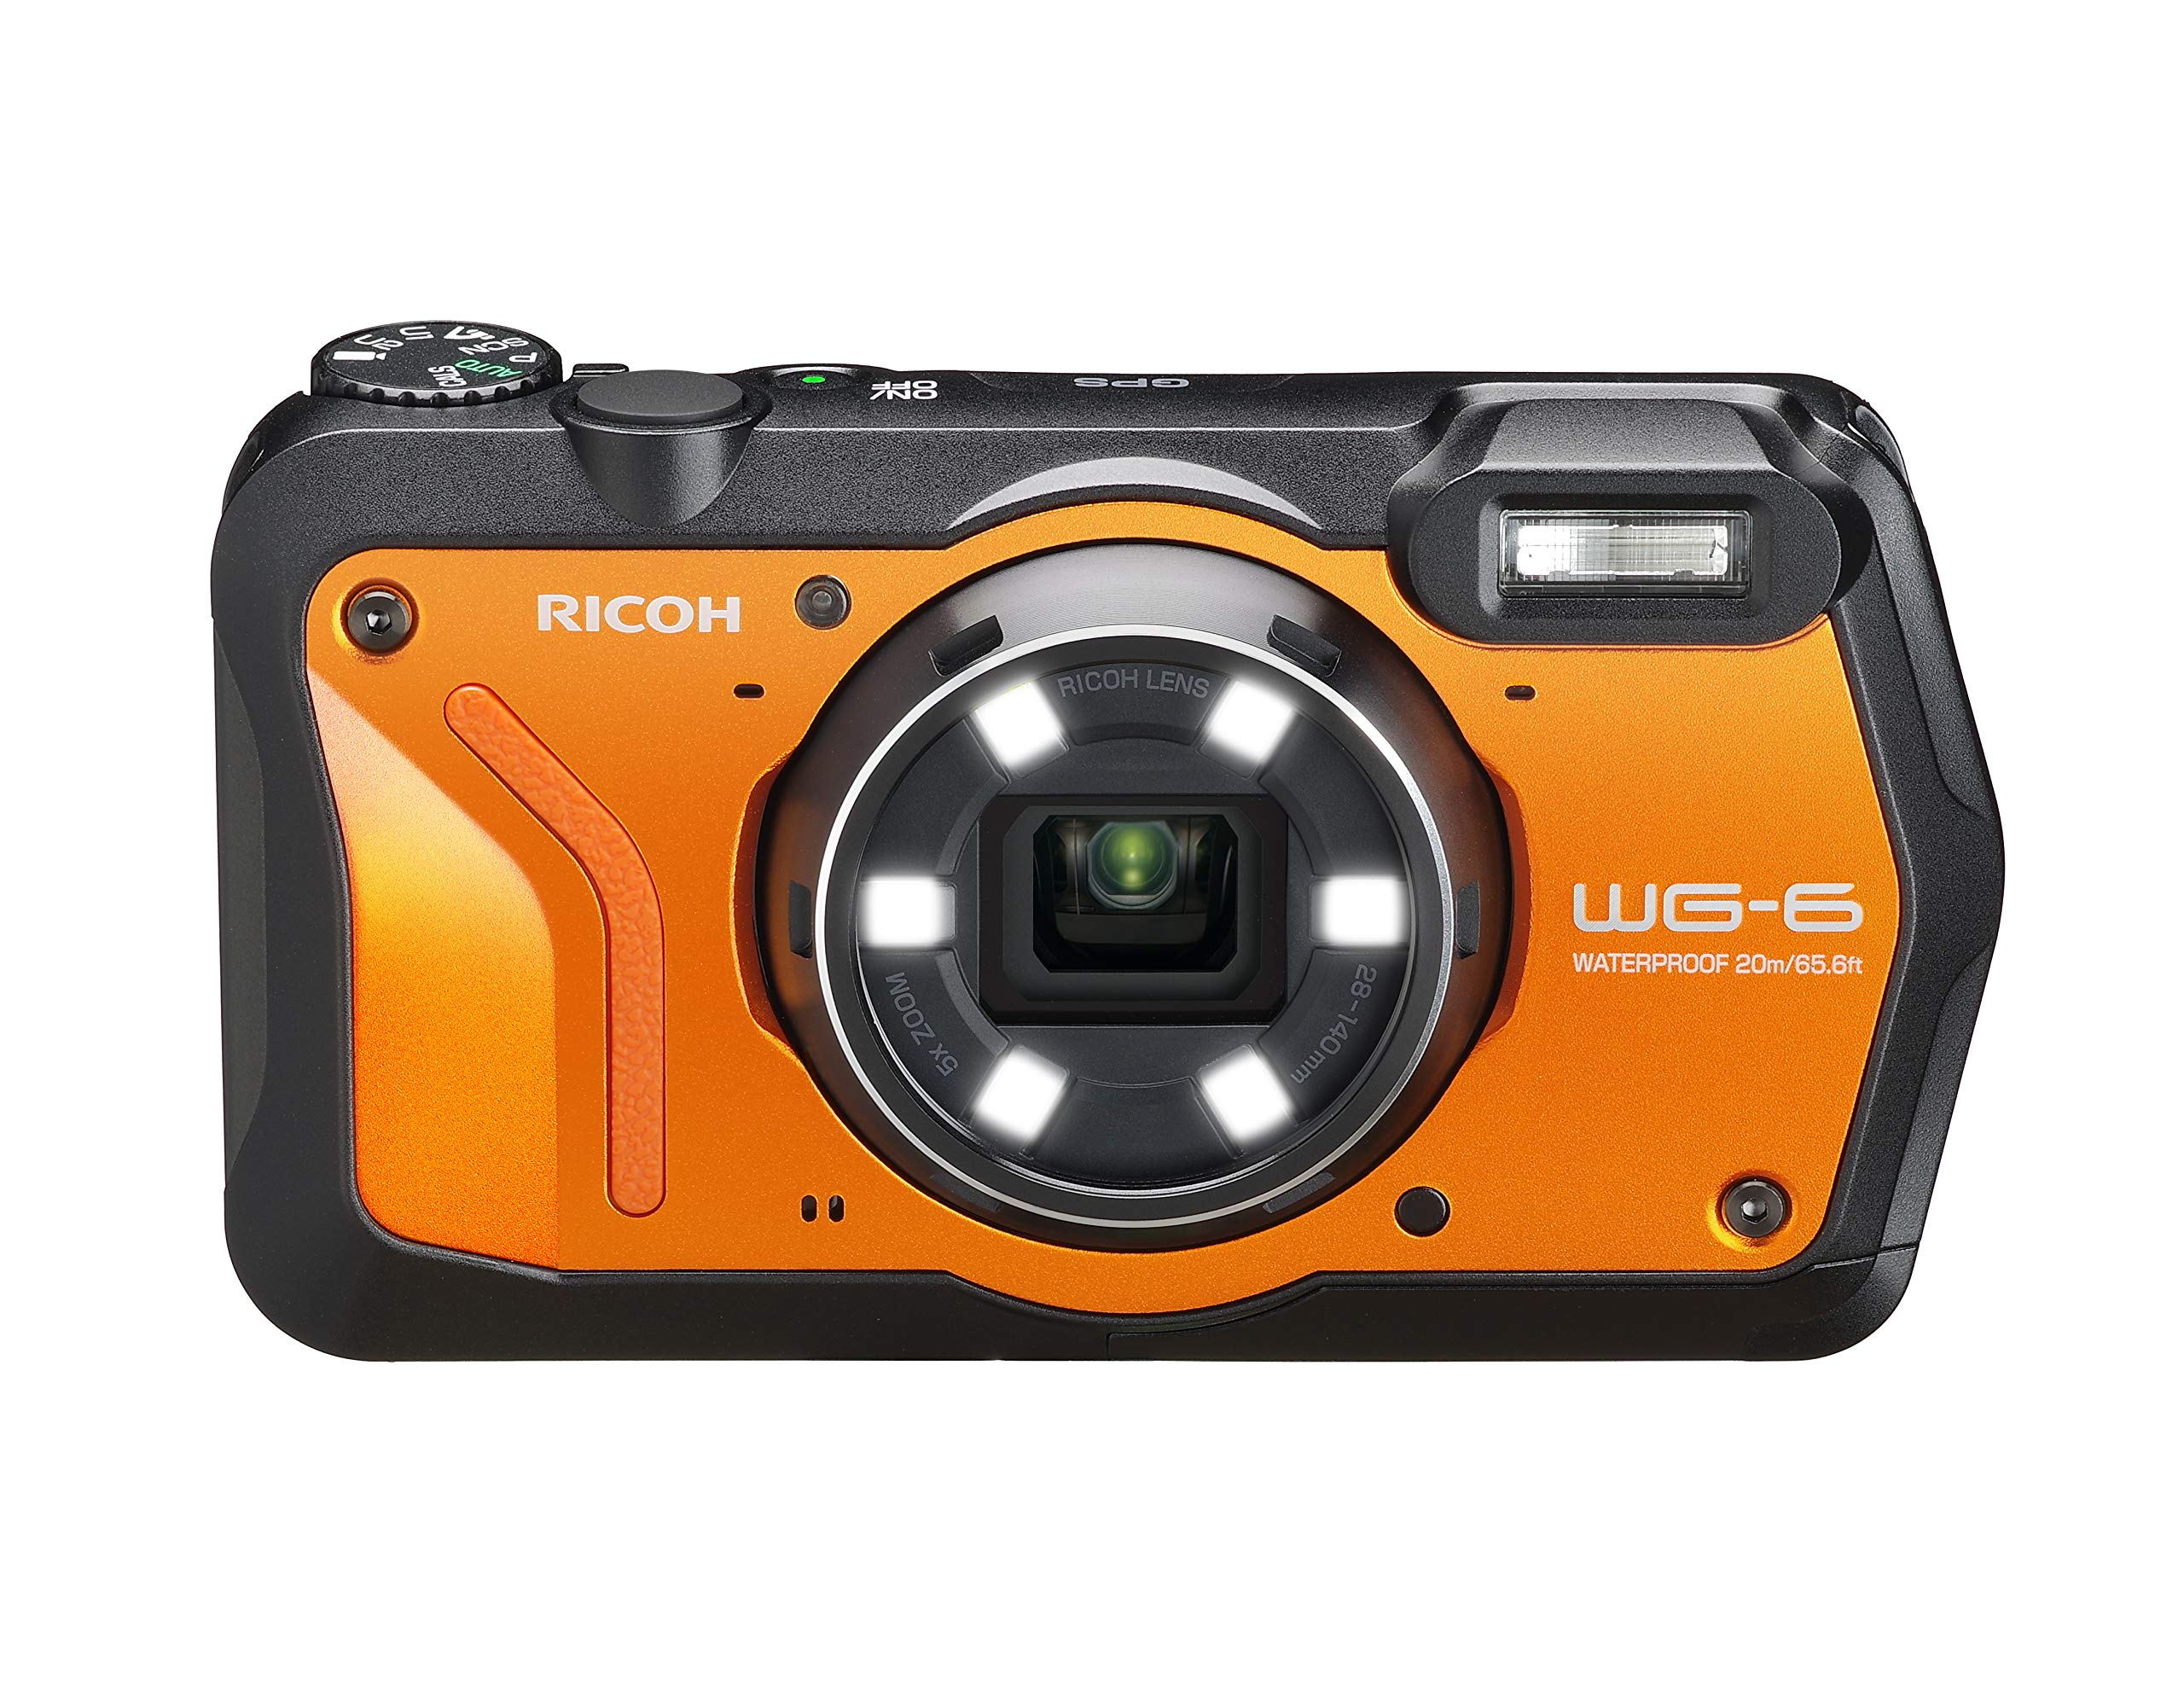 Ricoh WG-6 Webcam Orange Waterproof Camera 20MP Higher Resolution Images 3-Inch LCD Waterproof 20m Shockproof 2.1m Underwater Mode 6-LED Ring Light for Macro Photography